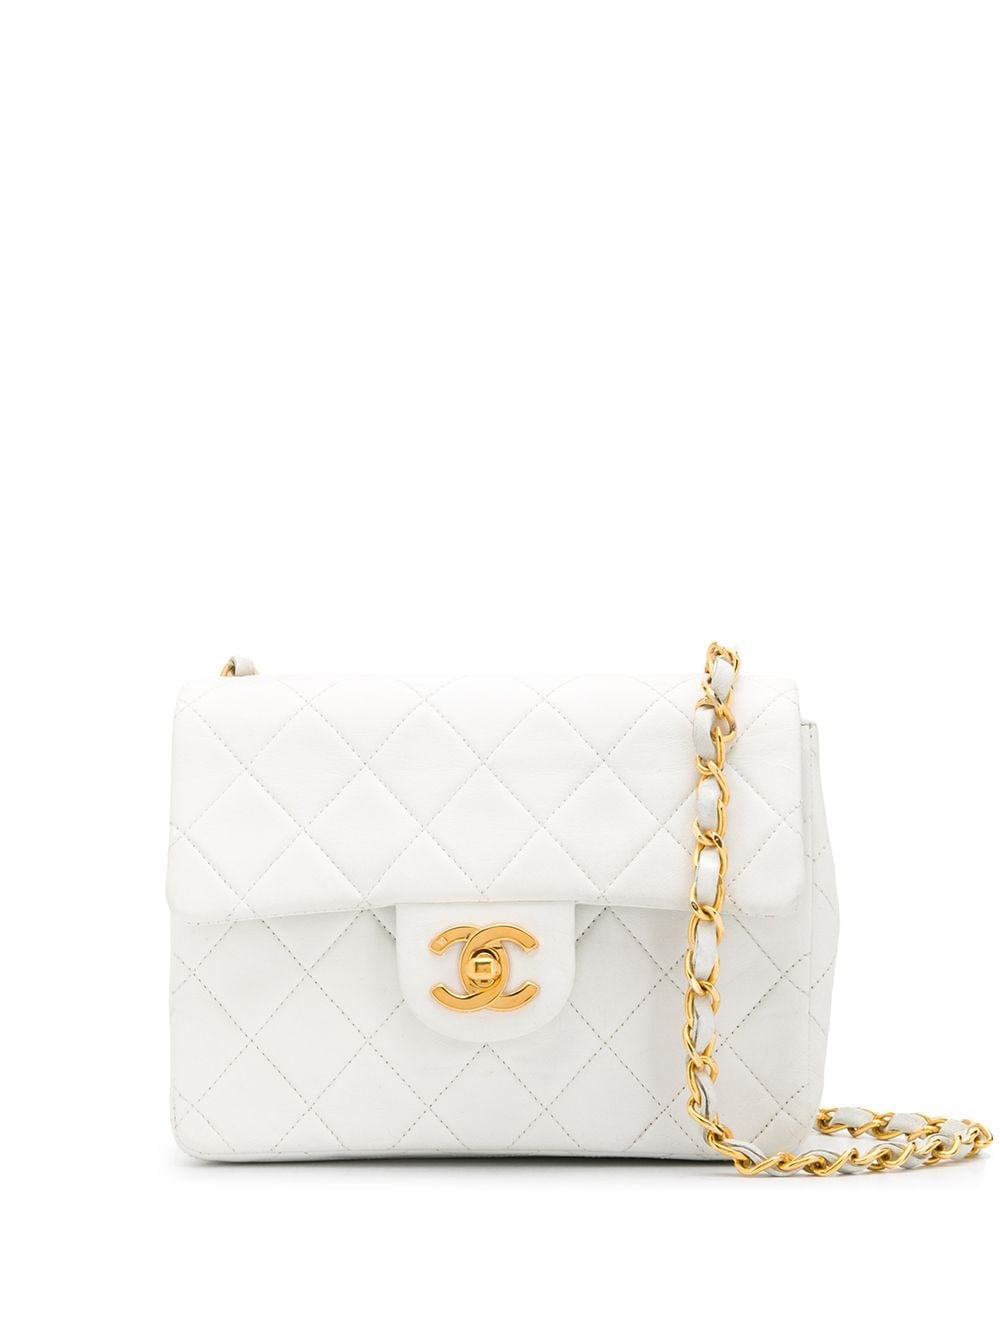 Chanel Pre-owned Timeless Classic Flap Shoulder Bag